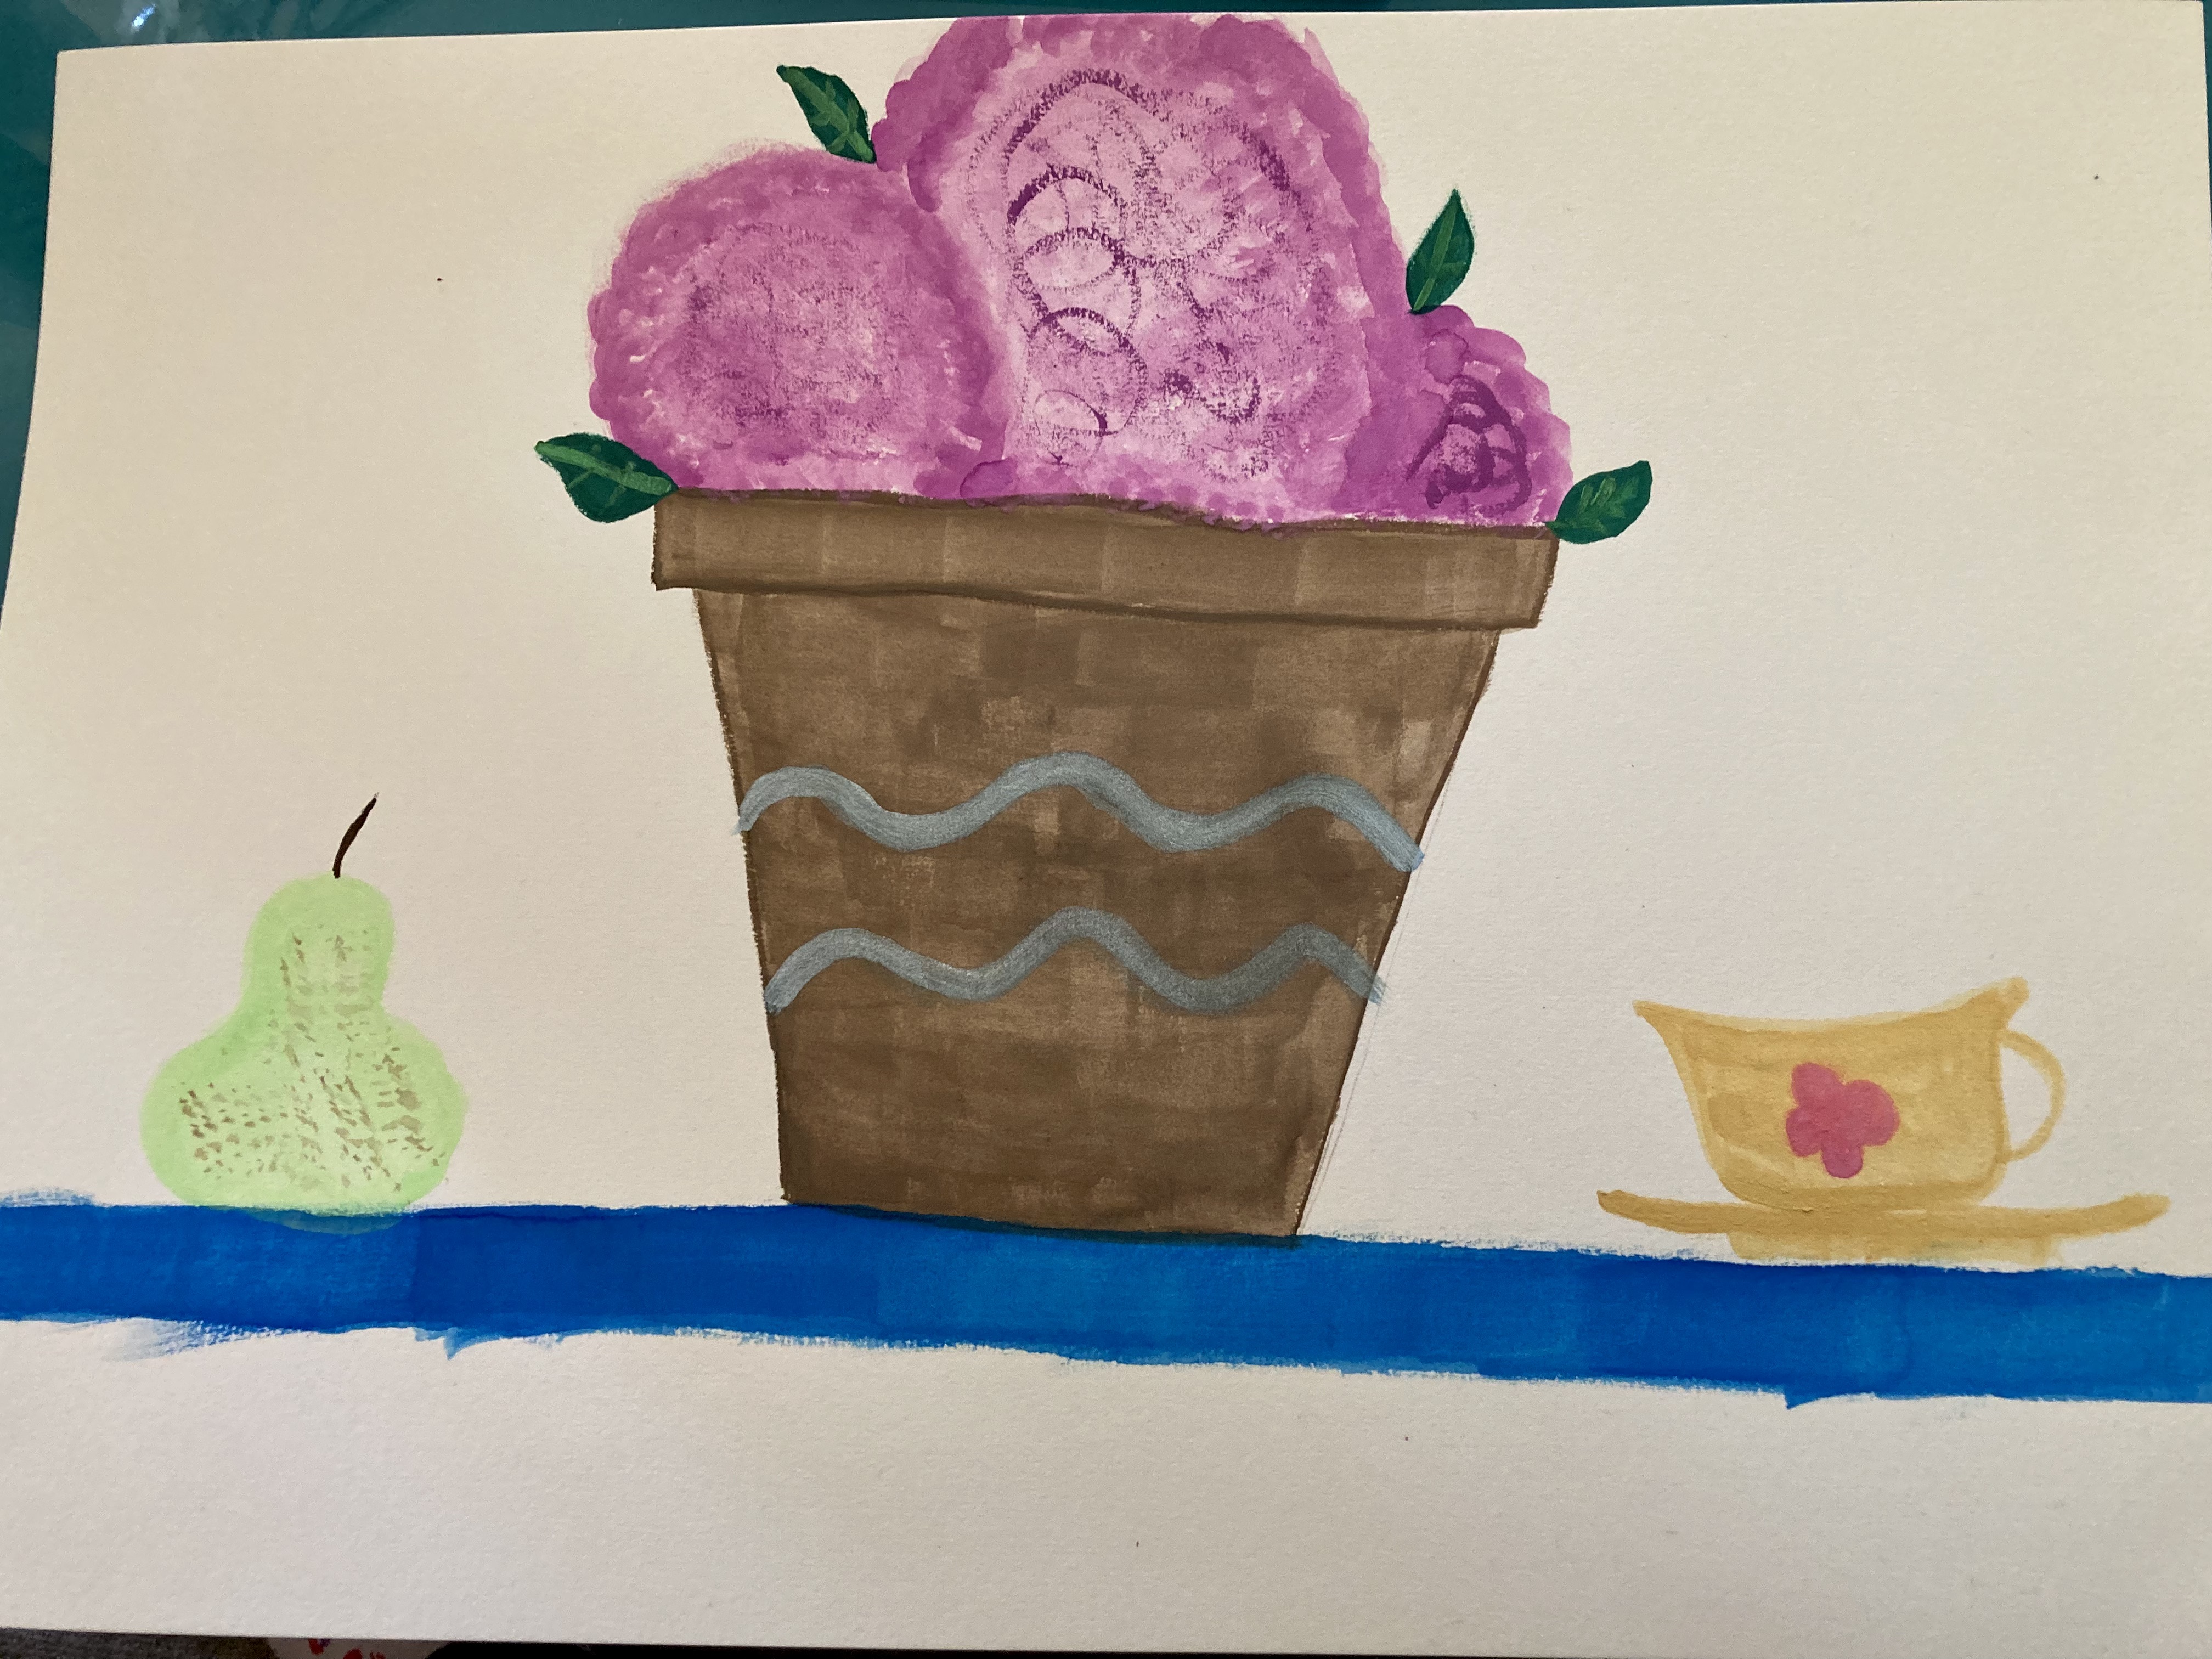 A watercolour still life of a pear, a put of purple flowers and a golden teacup.